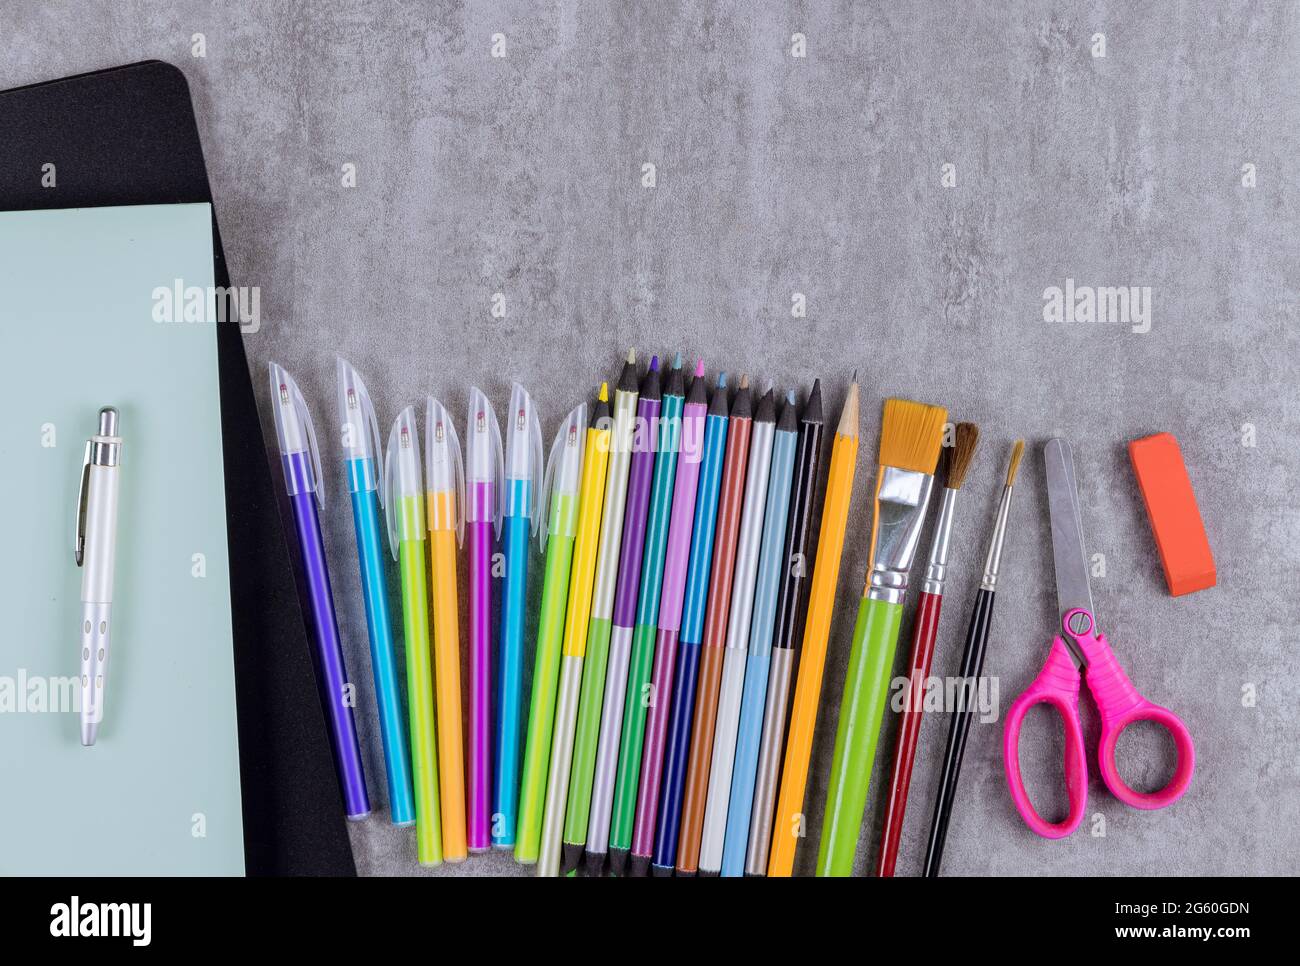 Stationery equipment in assortment of various school supplies items on school times Stock Photo